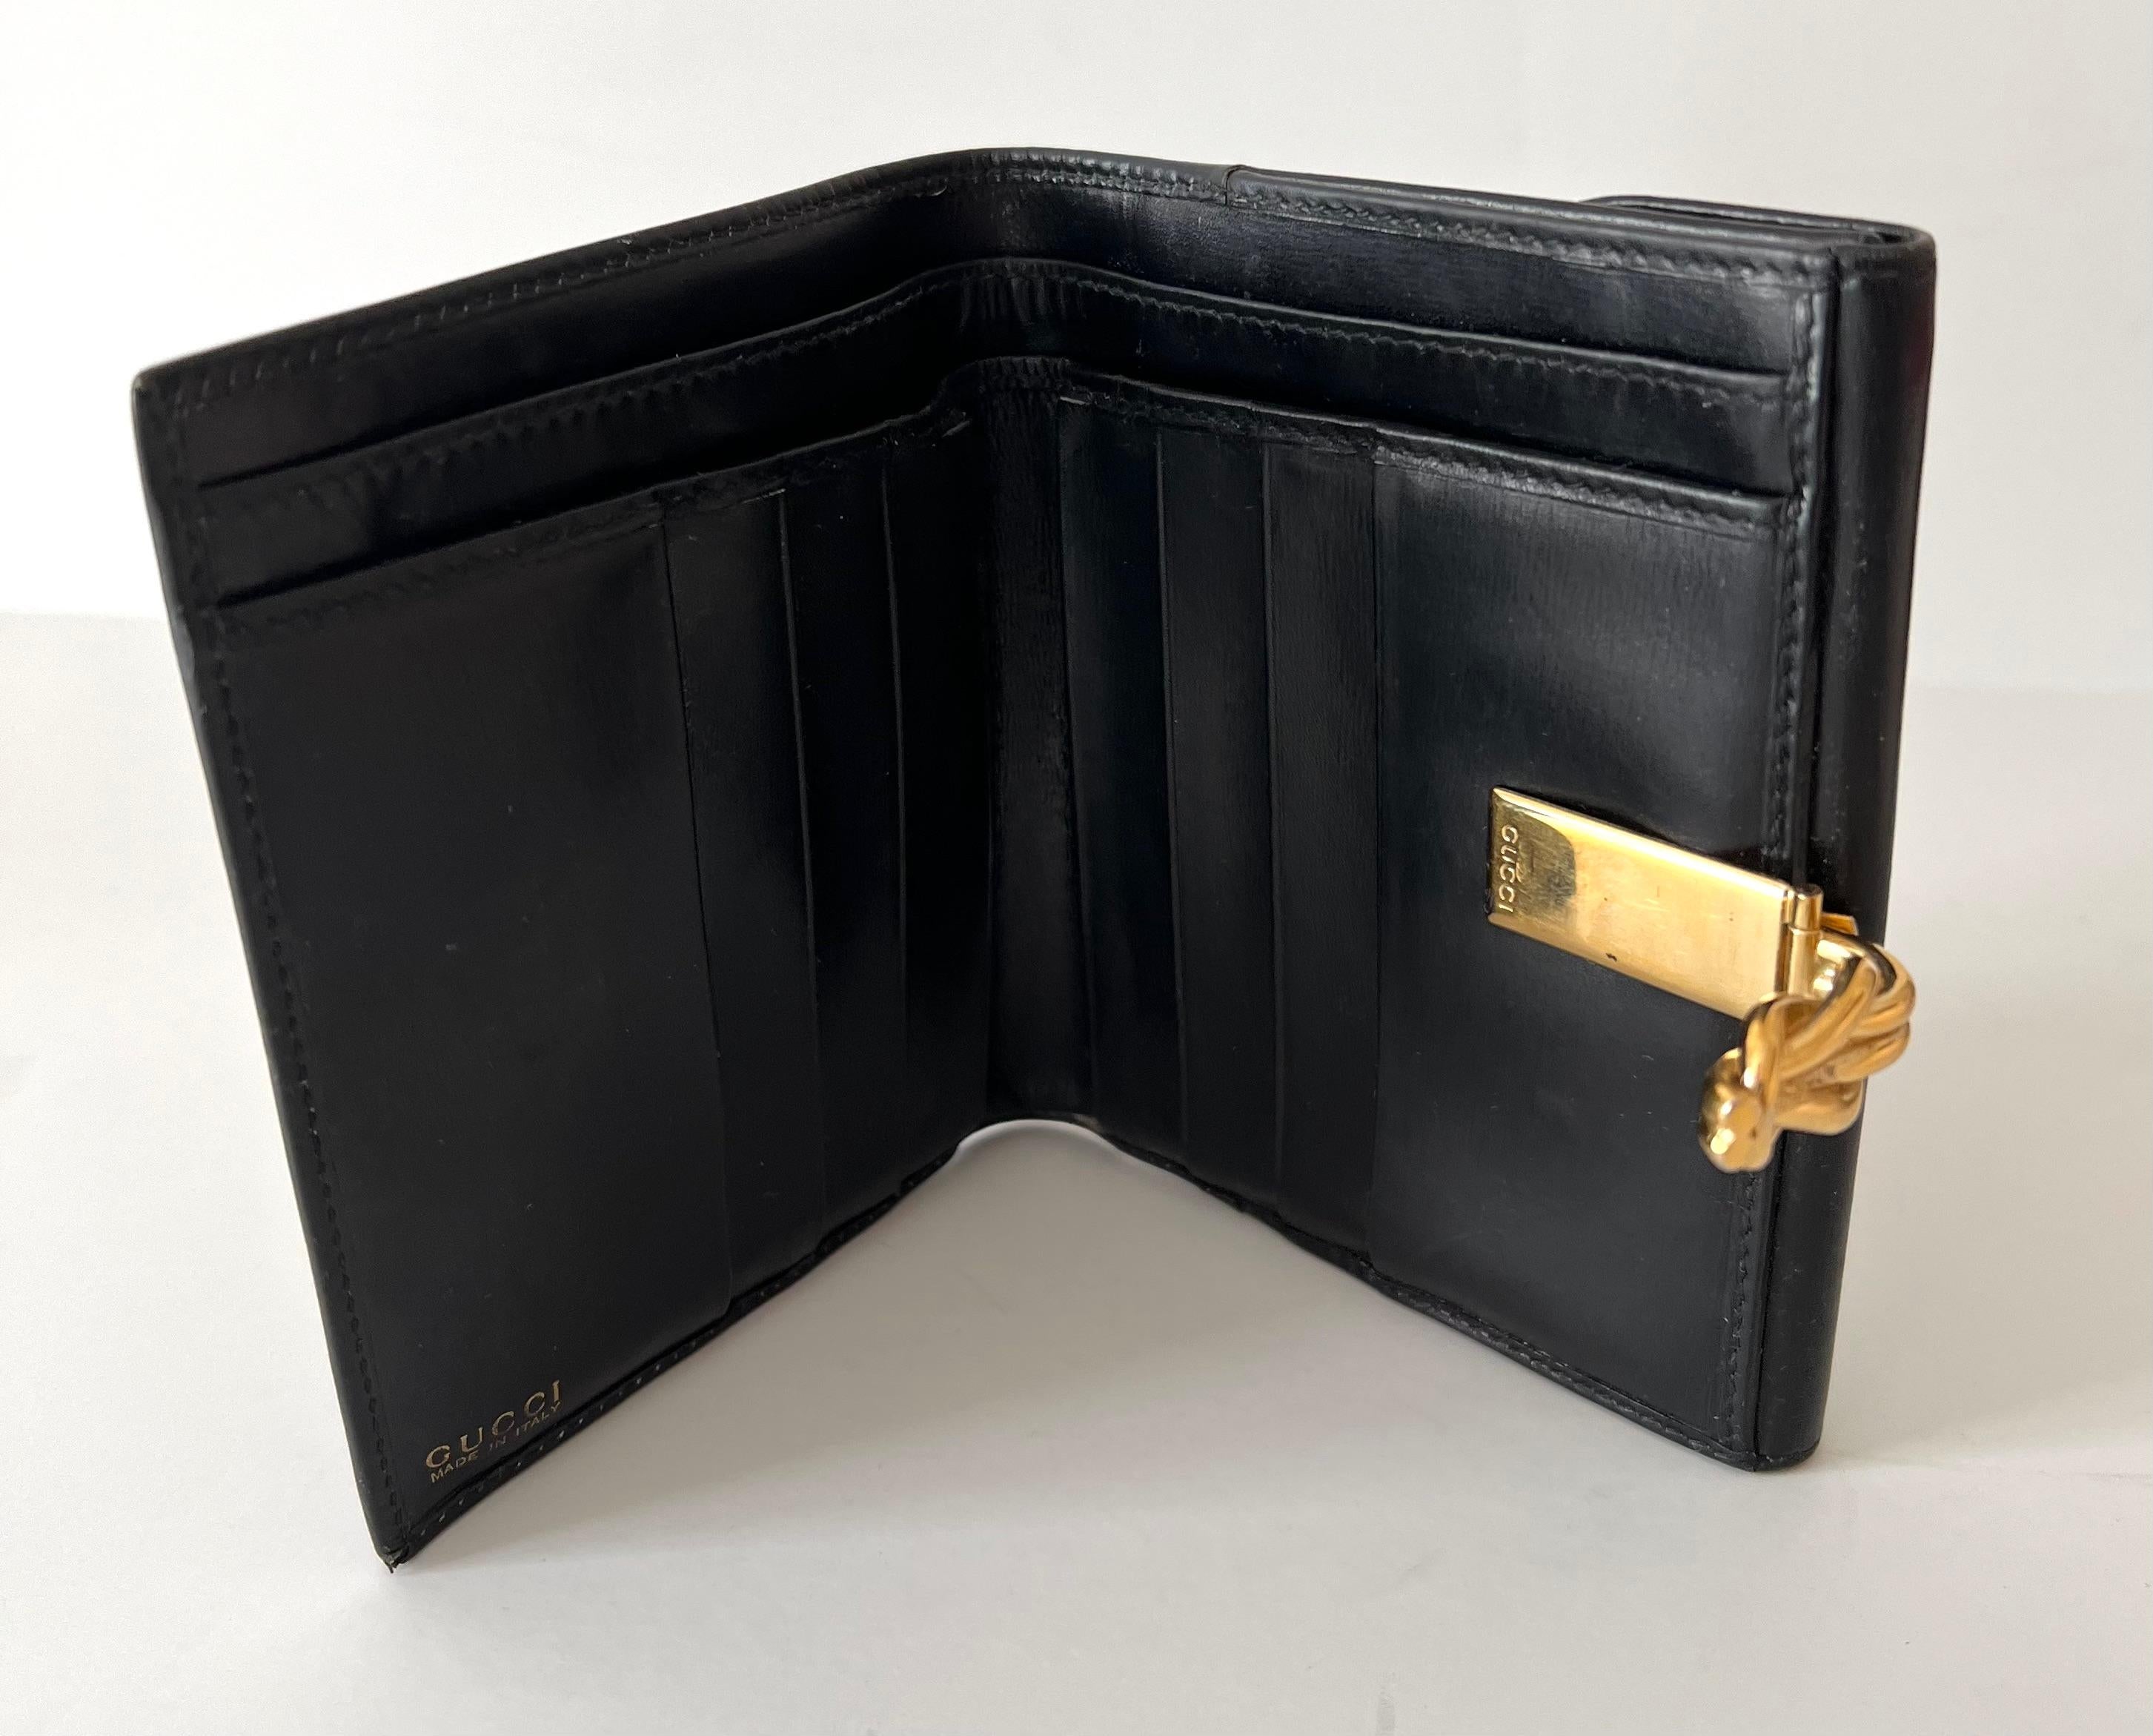 Modern Gucci Italian Leather Wallet with Gold Knott Closure and Coin Holder